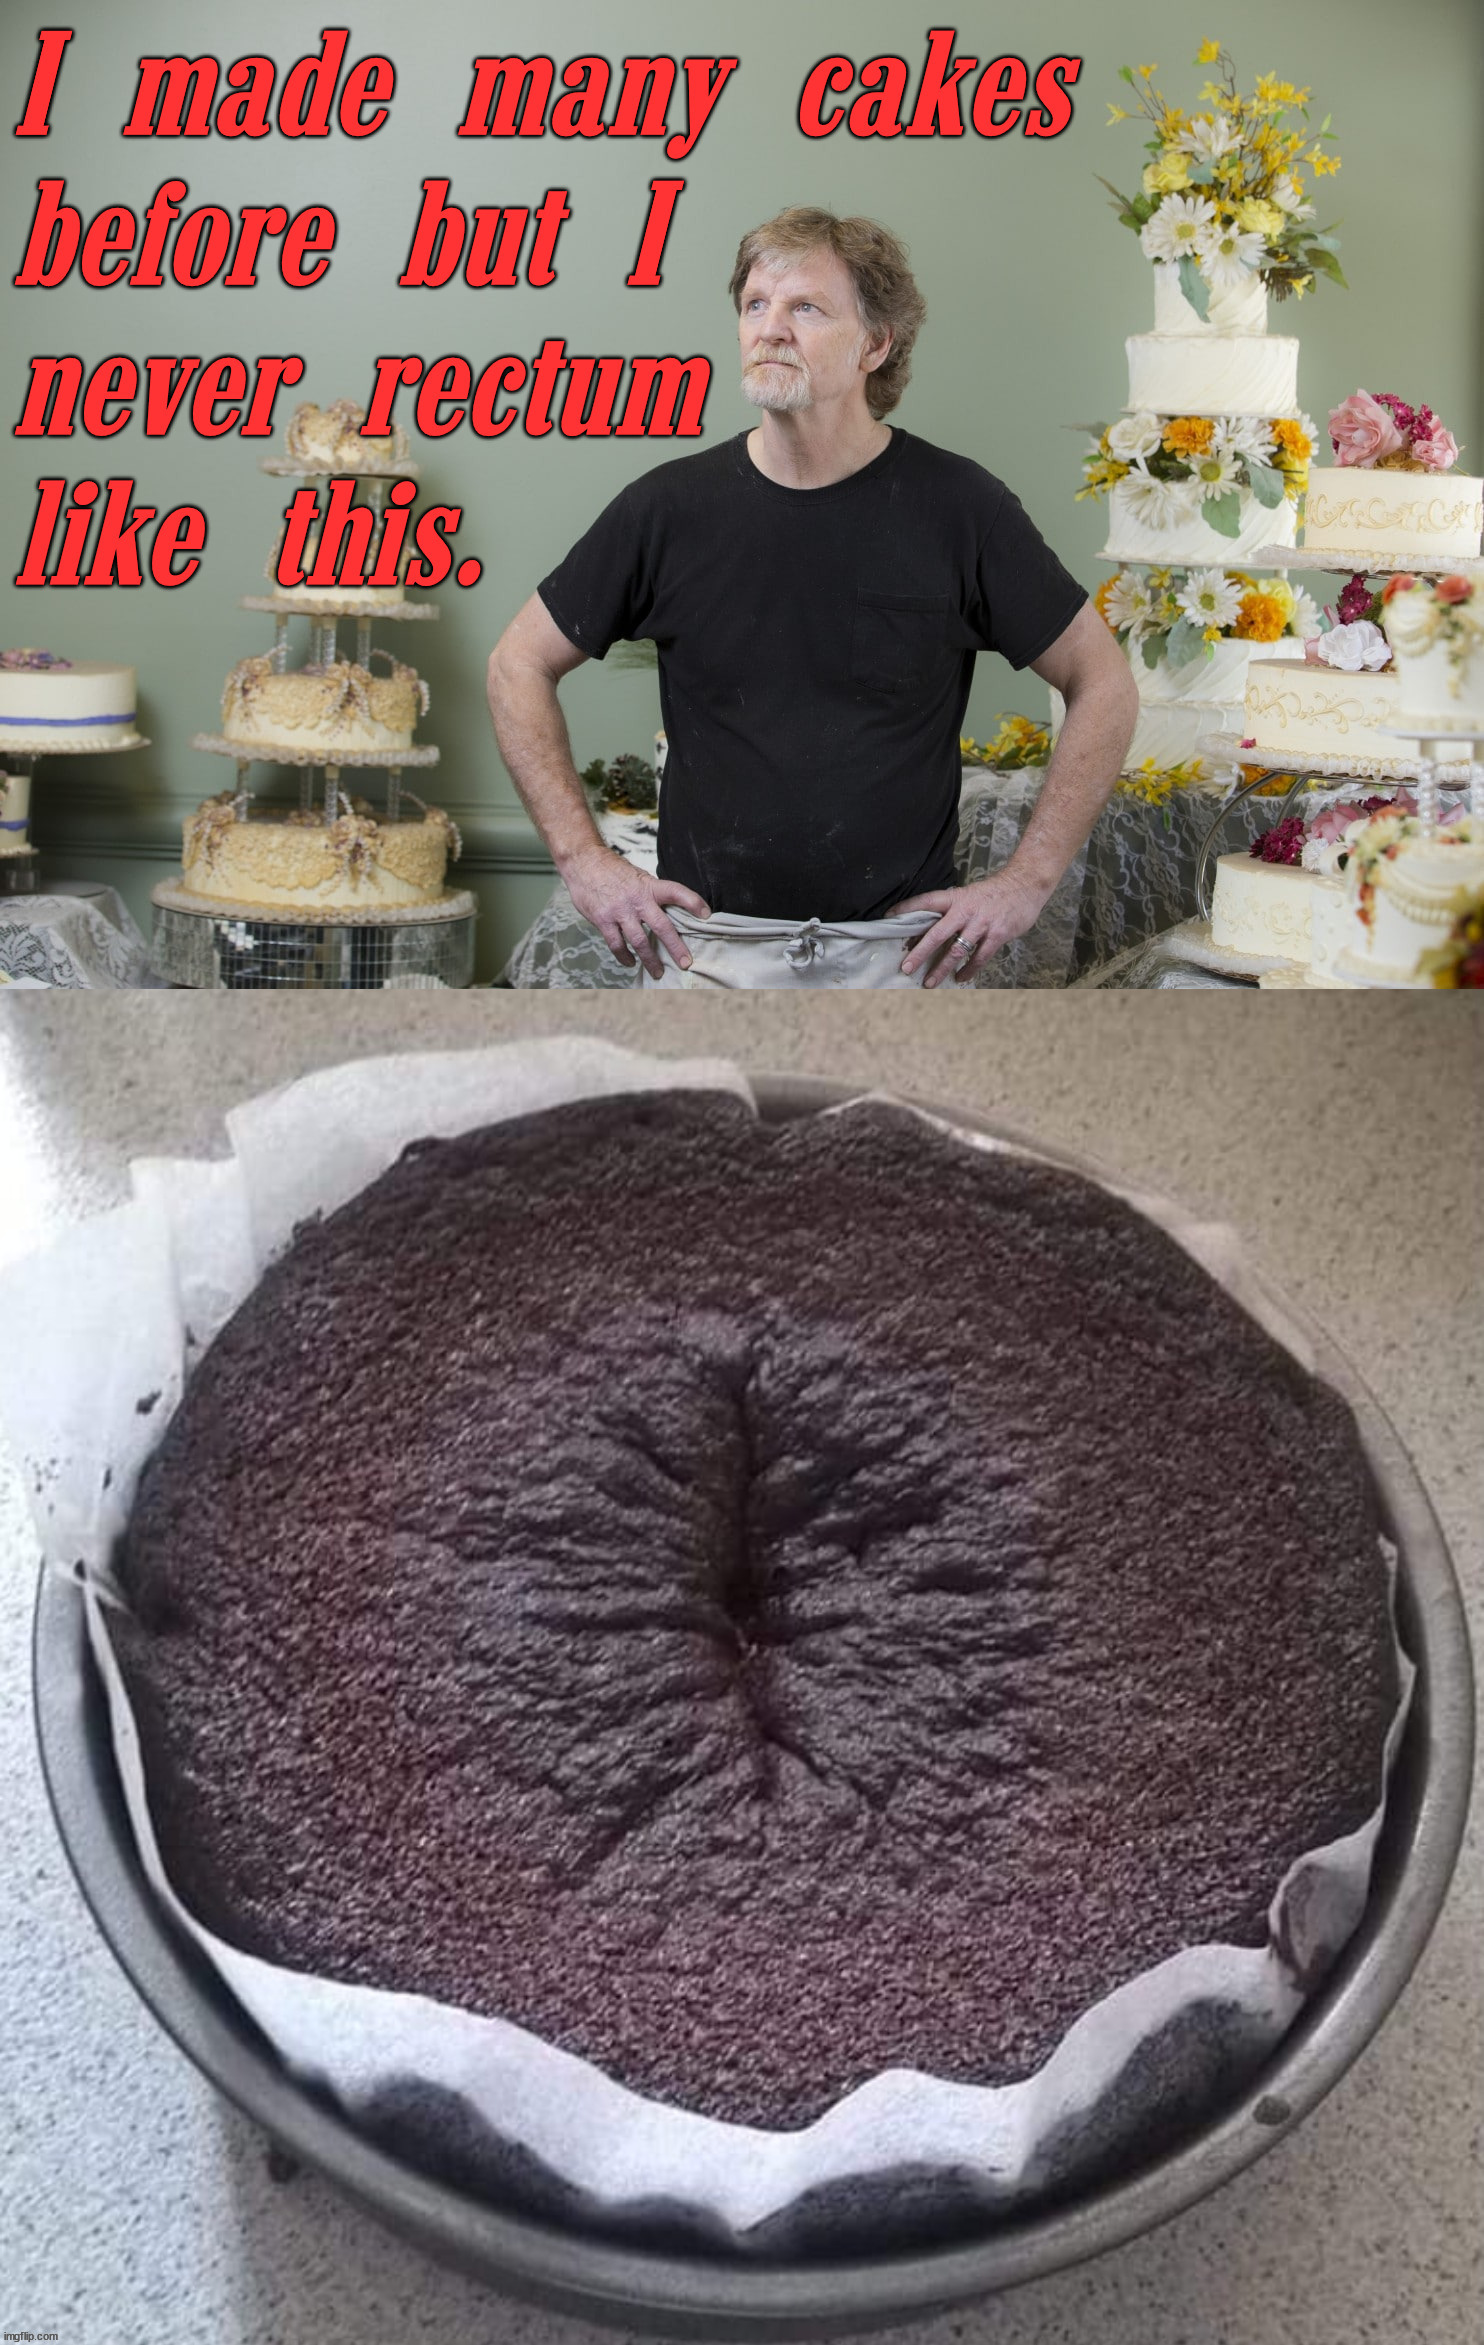 image tagged in cake | made w/ Imgflip meme maker